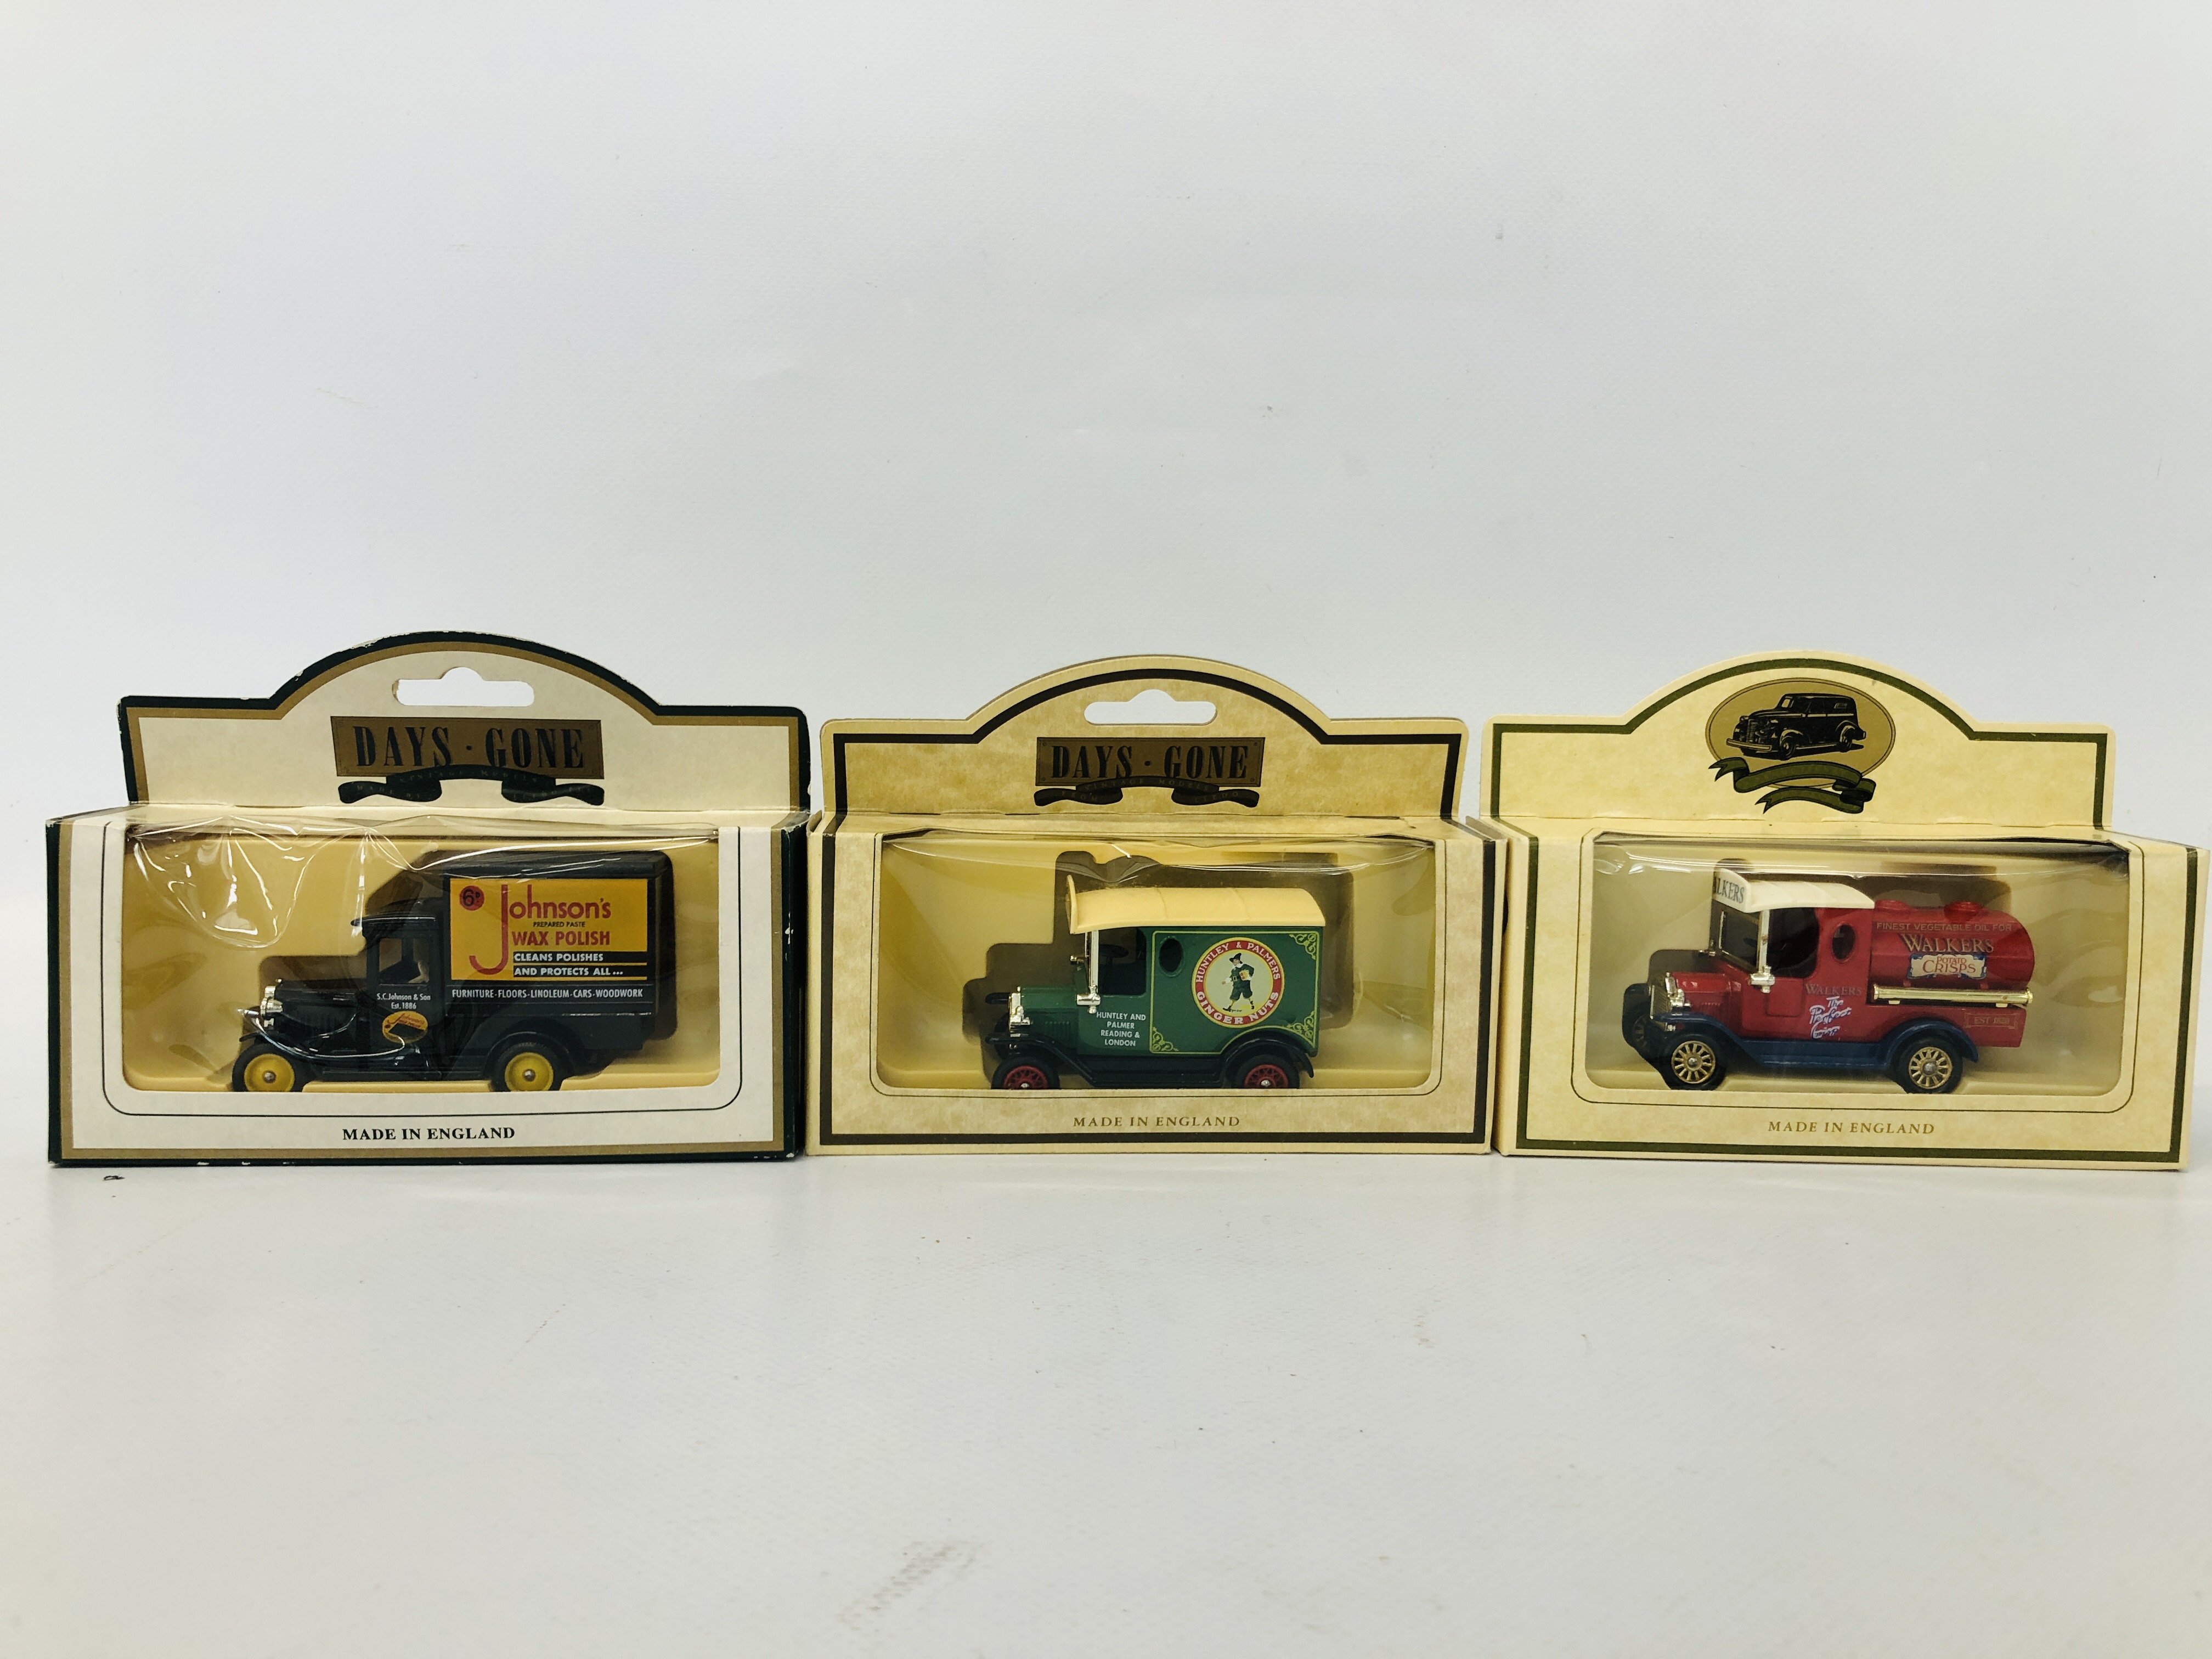 COLLECTION OF DAYS GONE COLLECTORS DIE-CAST MODEL VEHICLES IN ORIGINAL BOXES - Image 9 of 10